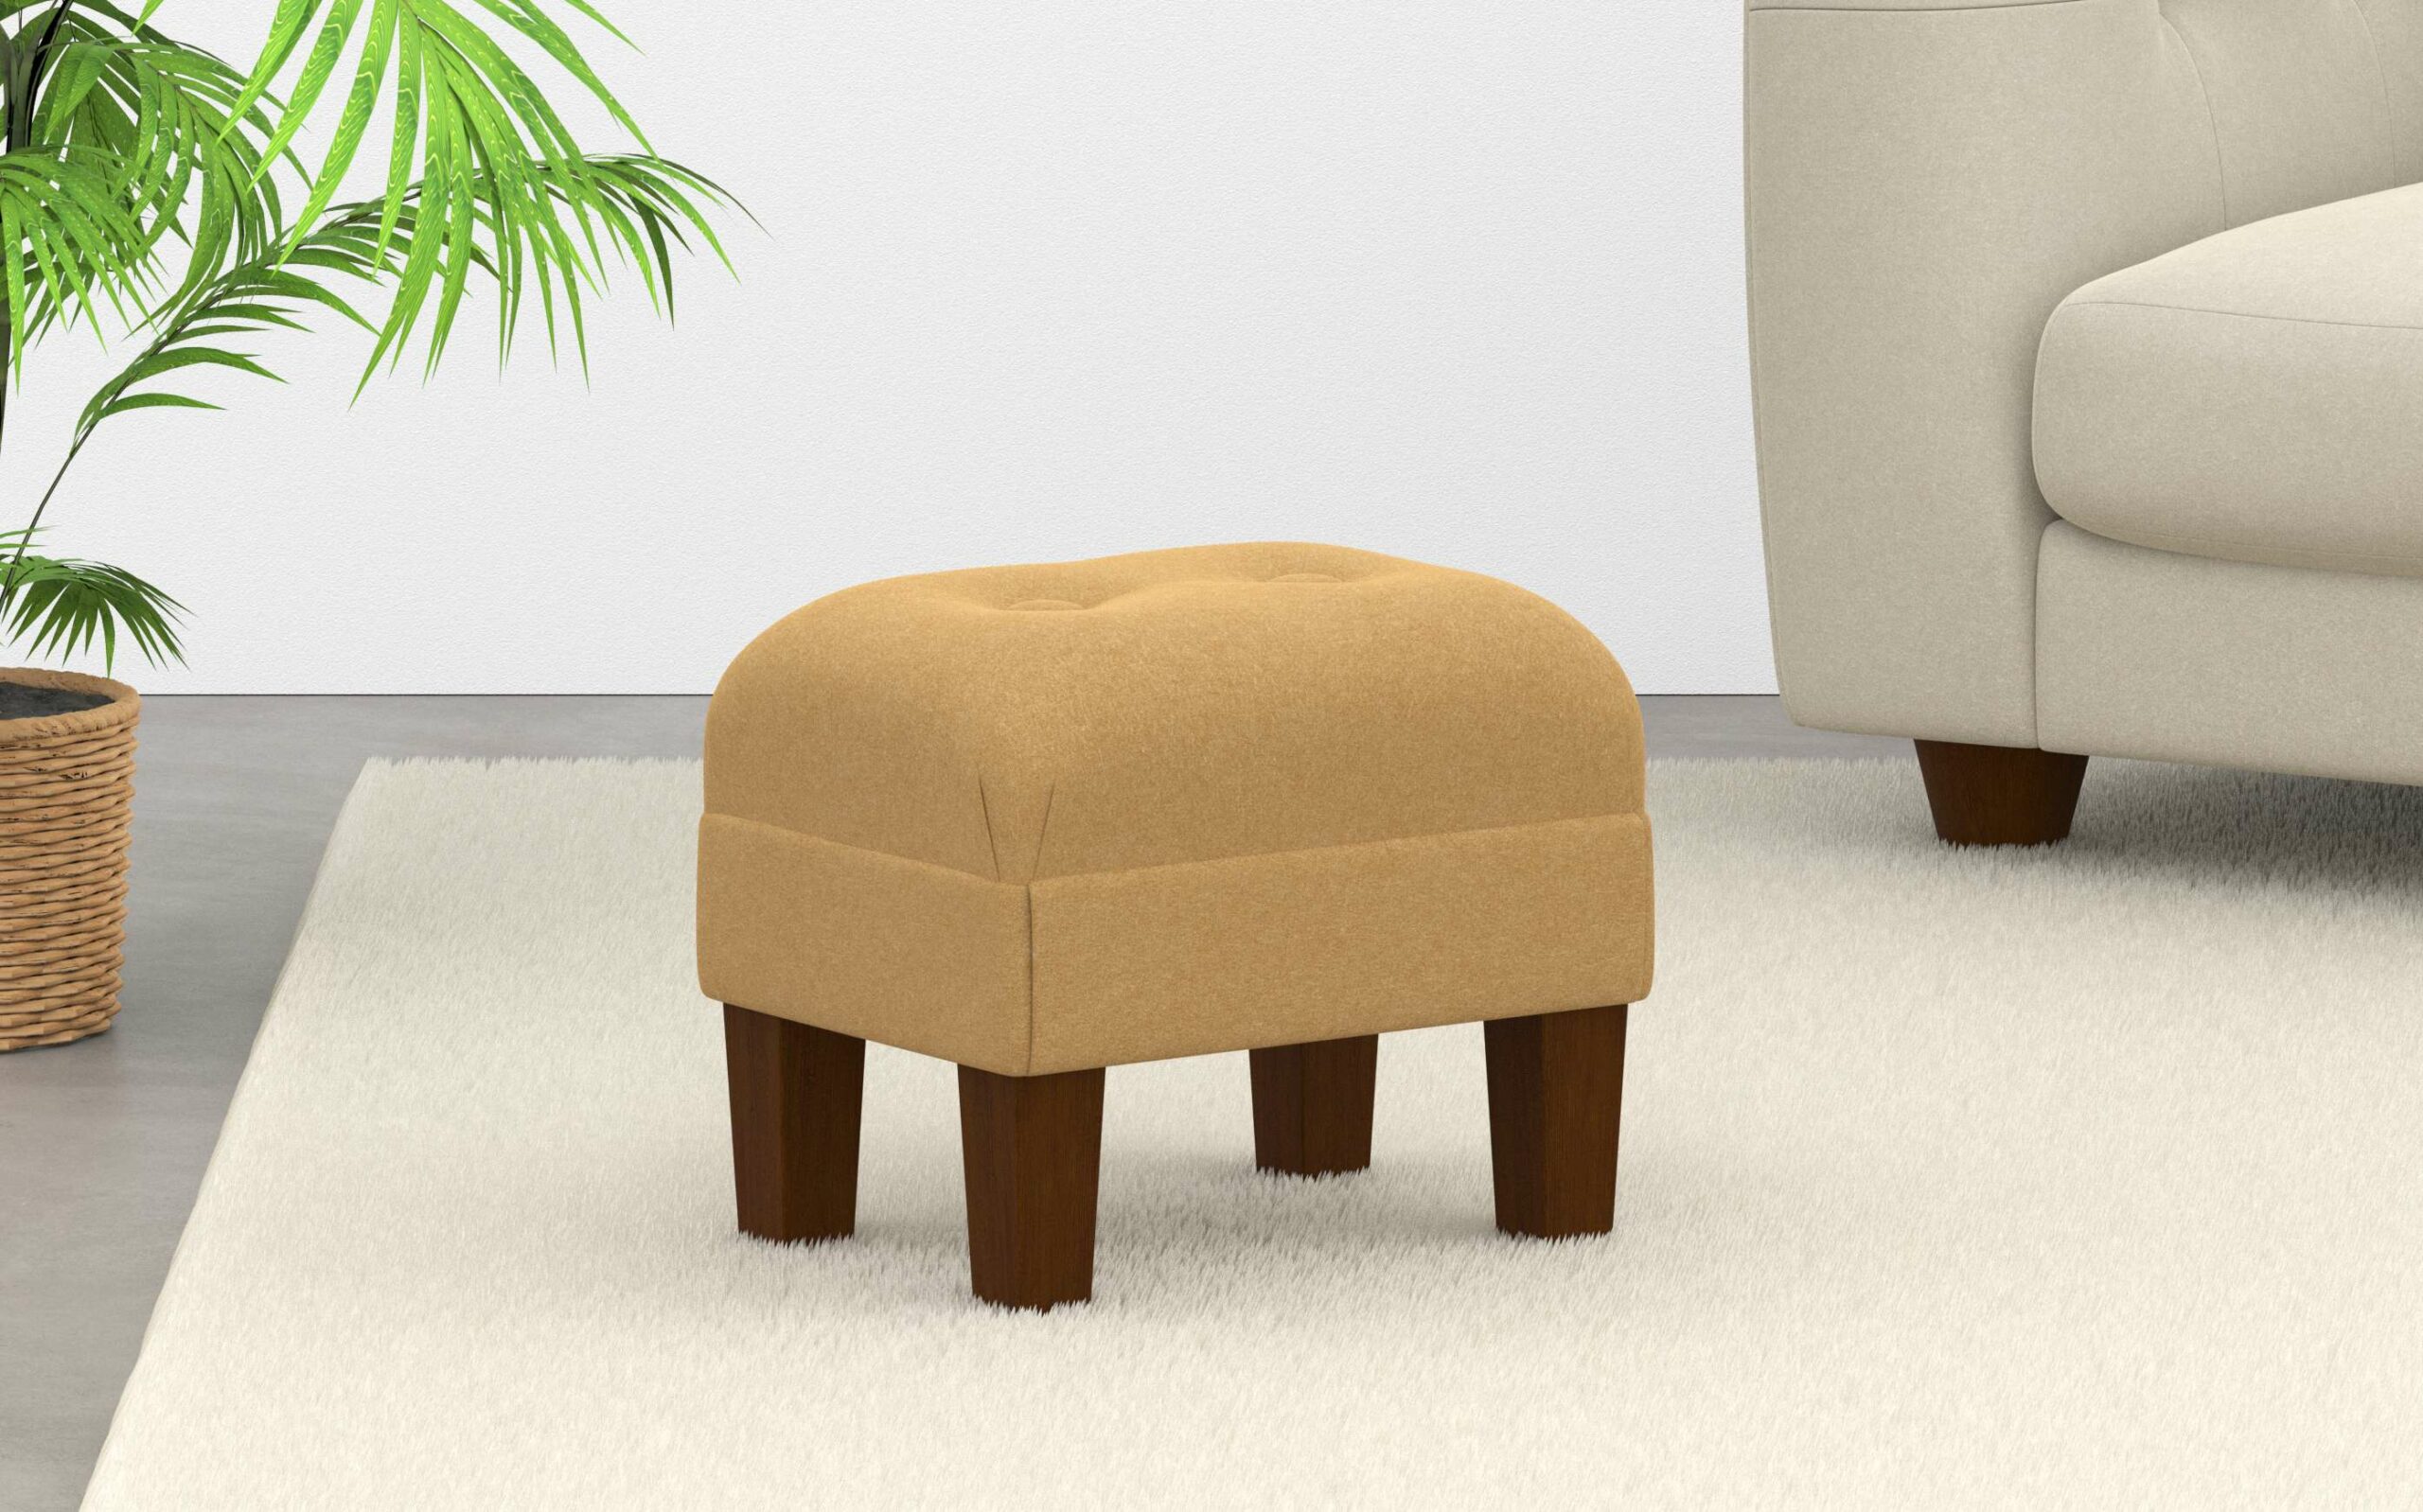 https://www.footstools.co.uk/wp-content/uploads/small-button-footstool-wool-lemon-3-scaled.jpg